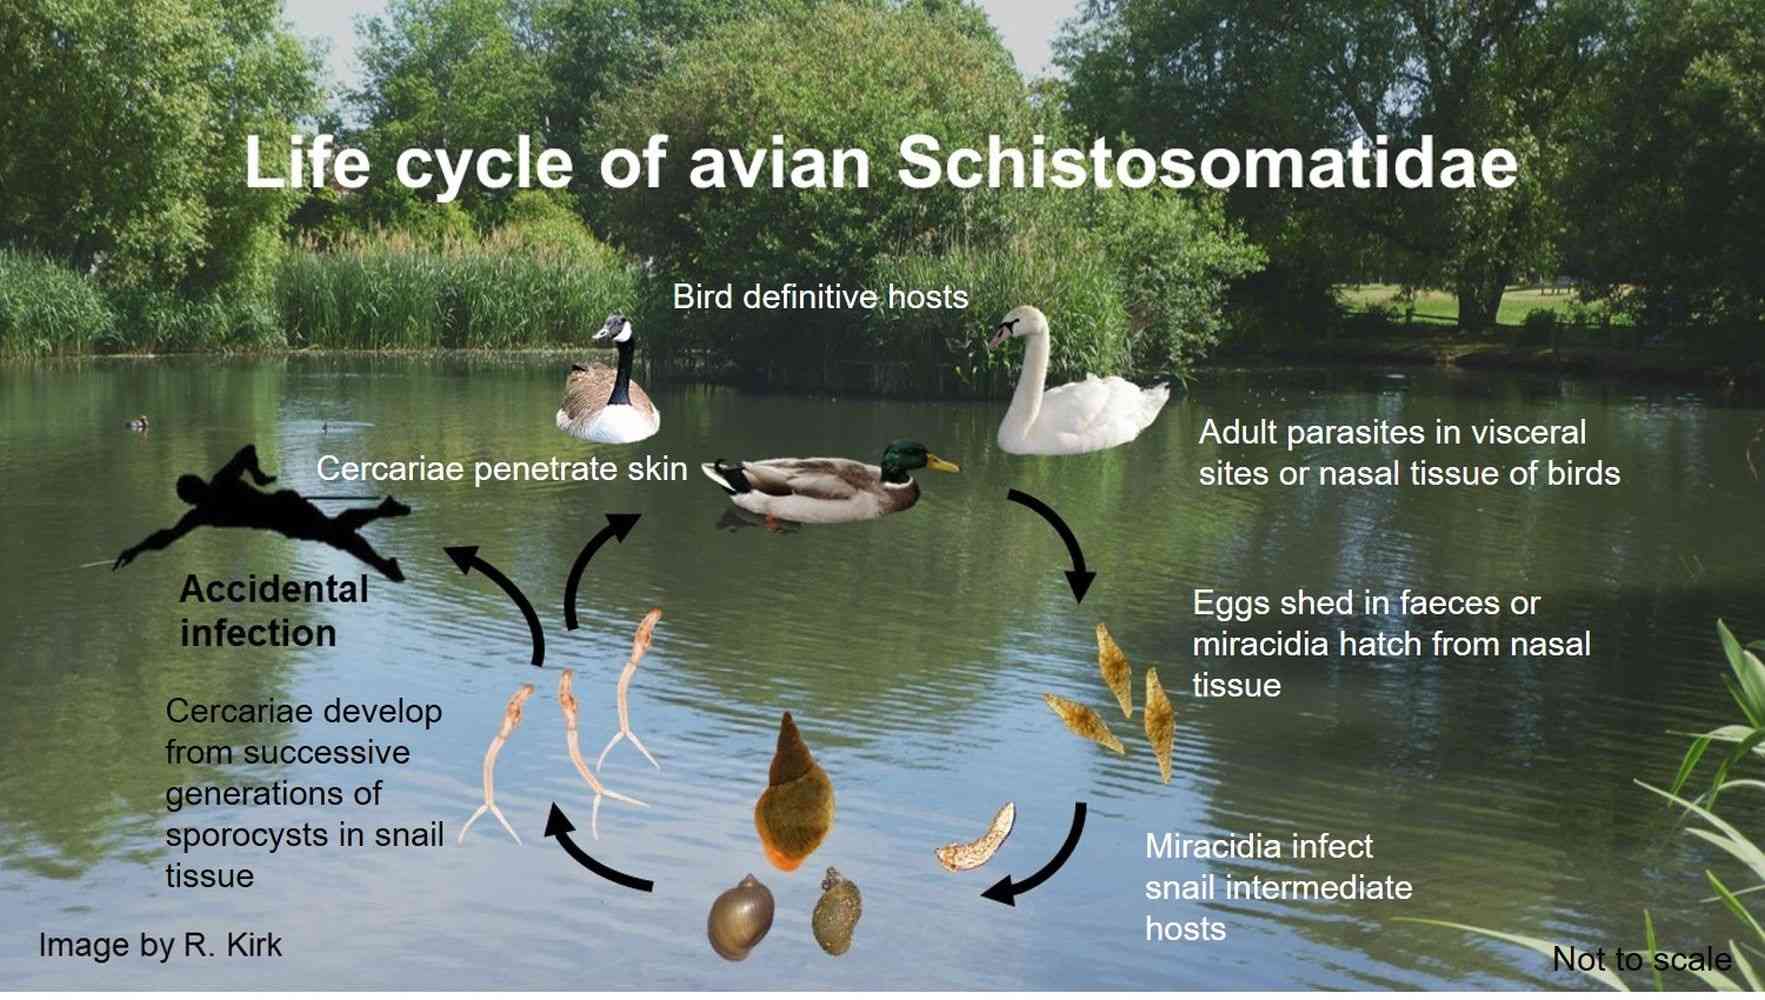 Life cycle of avian Schistosomatidae parasites - Avian schistosomatid parasites cause pathology in a variety of birds and are agents of human cercarial dermatitis.